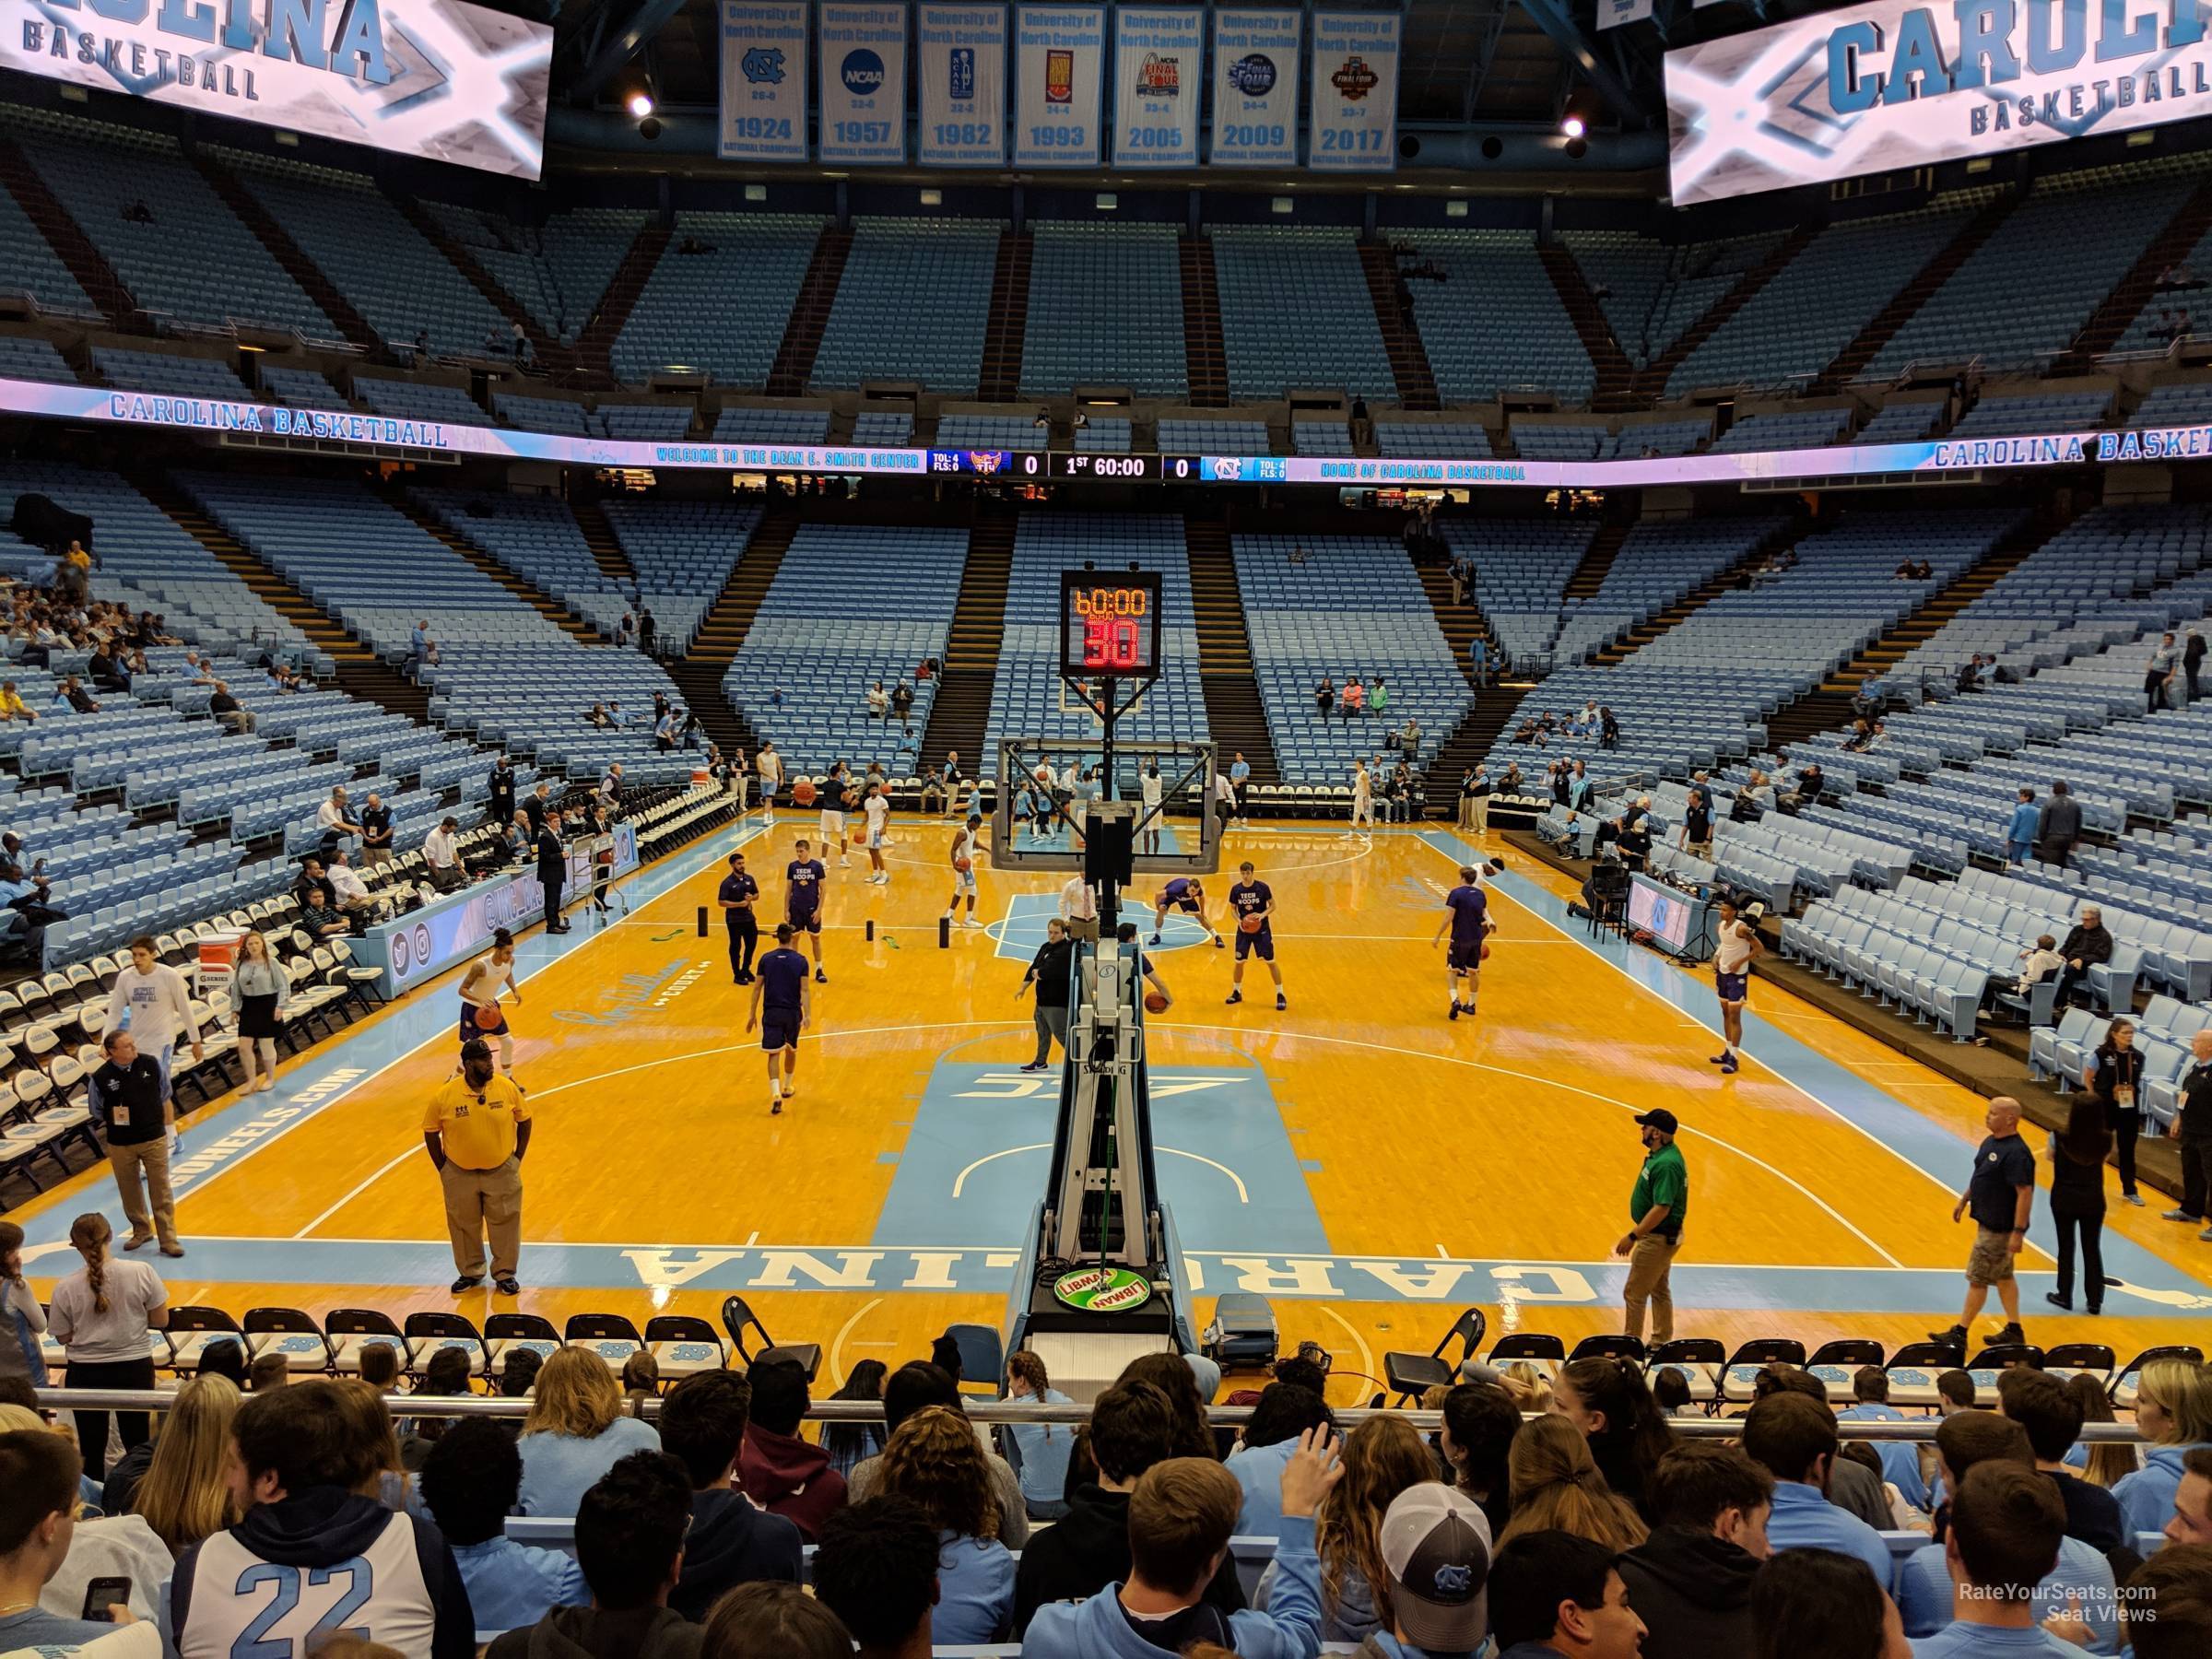 section 117, row m seat view  - dean smith center